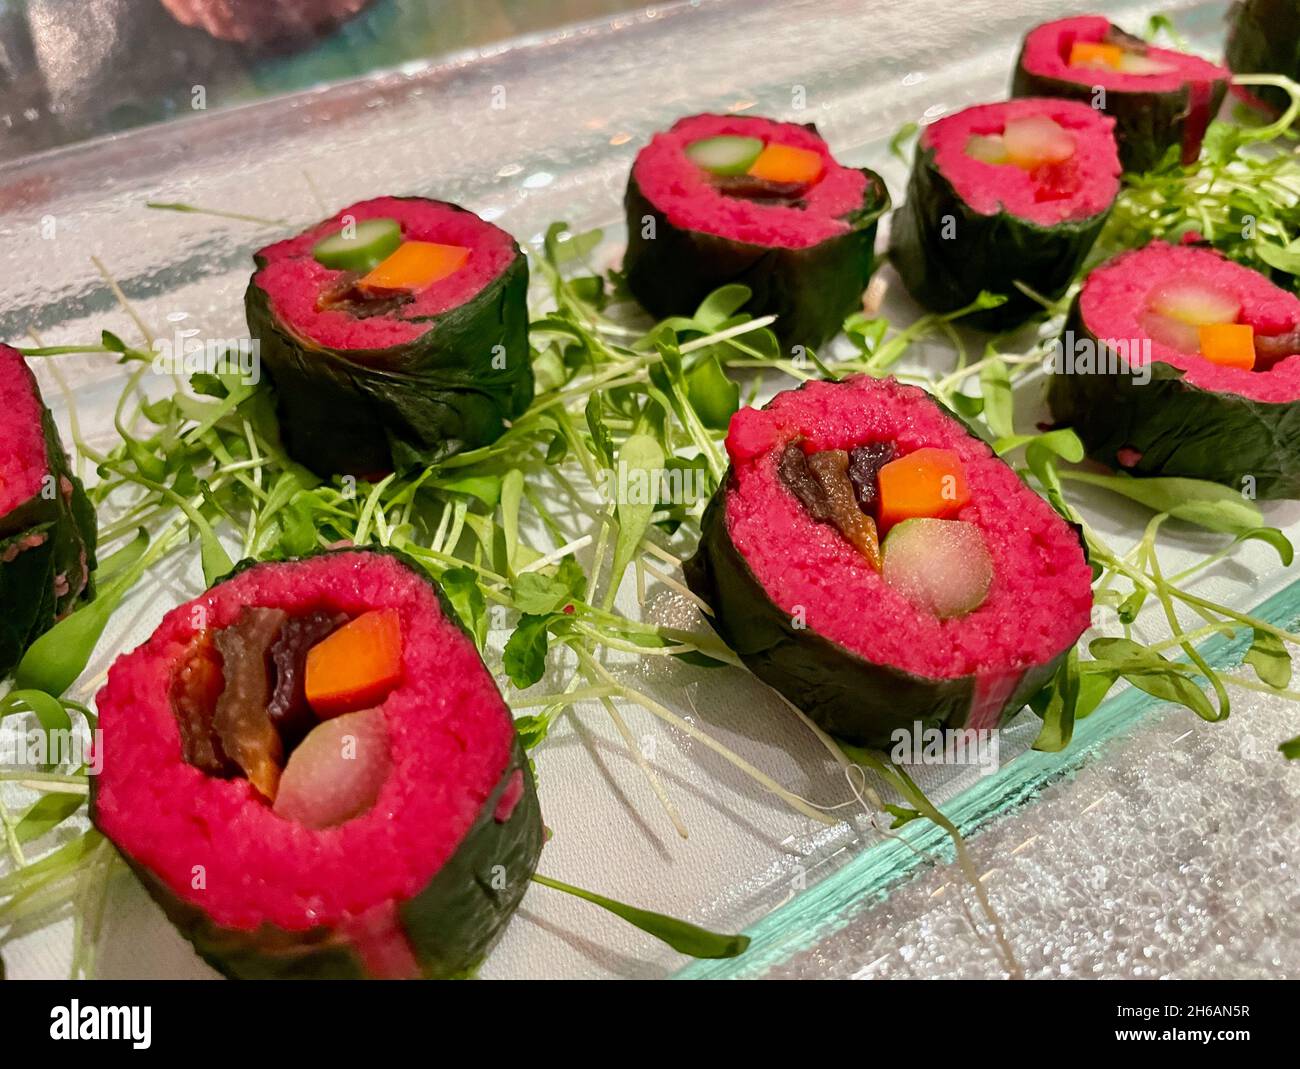 Close up of colorful vegetable maki, carrot, asparagus, beetroot, seaweed on glass plate. Stock Photo